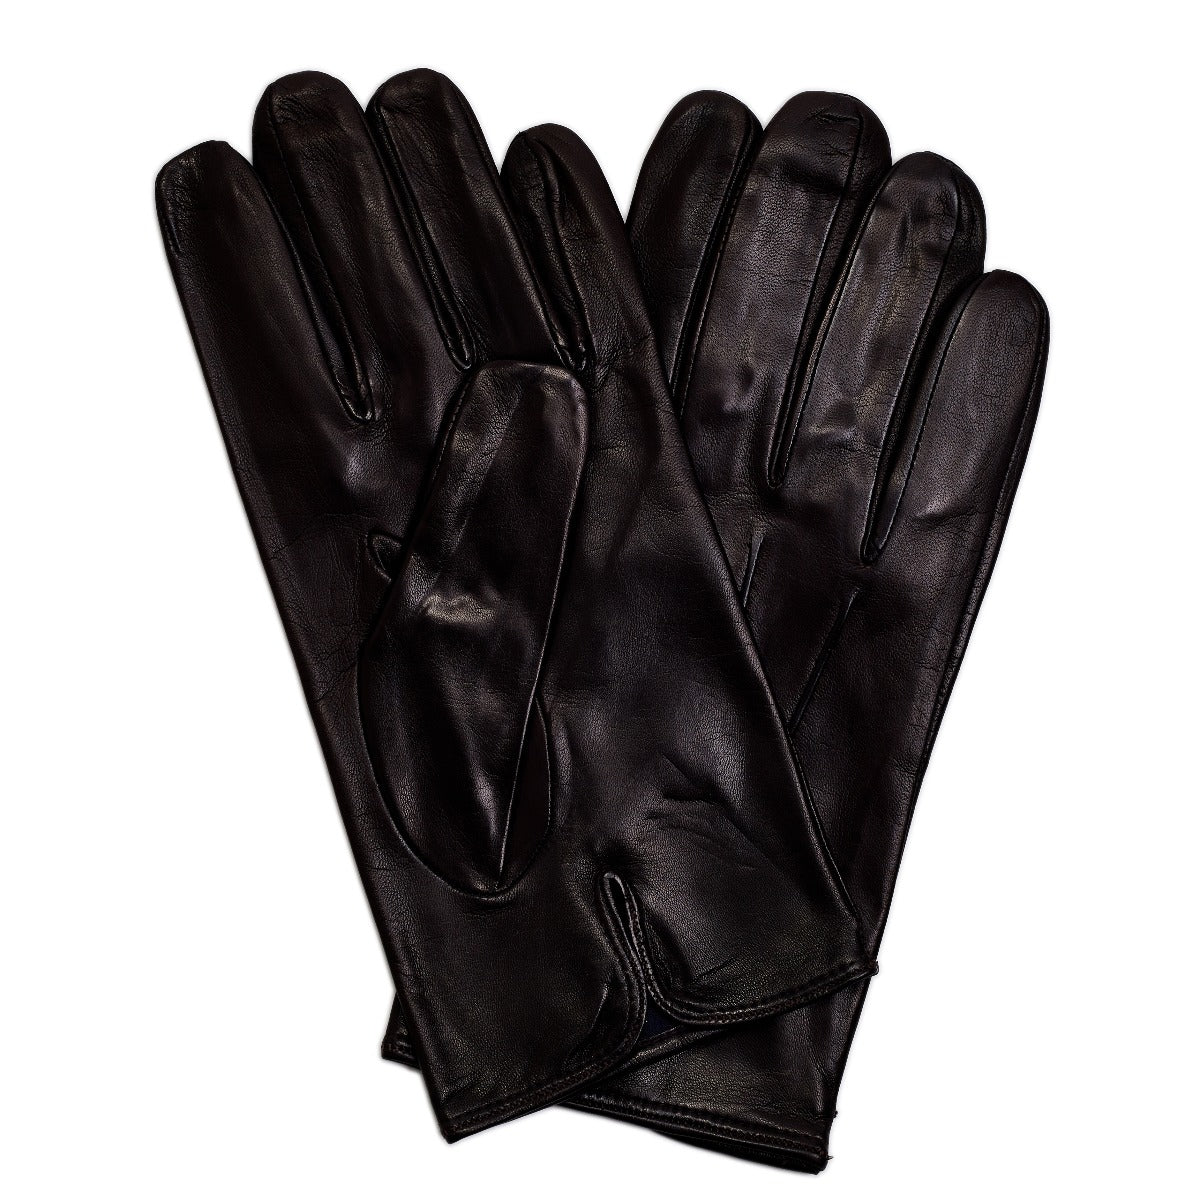 Sovereign Grade Dark Brown Nappa Leather Gloves, Silk Lined